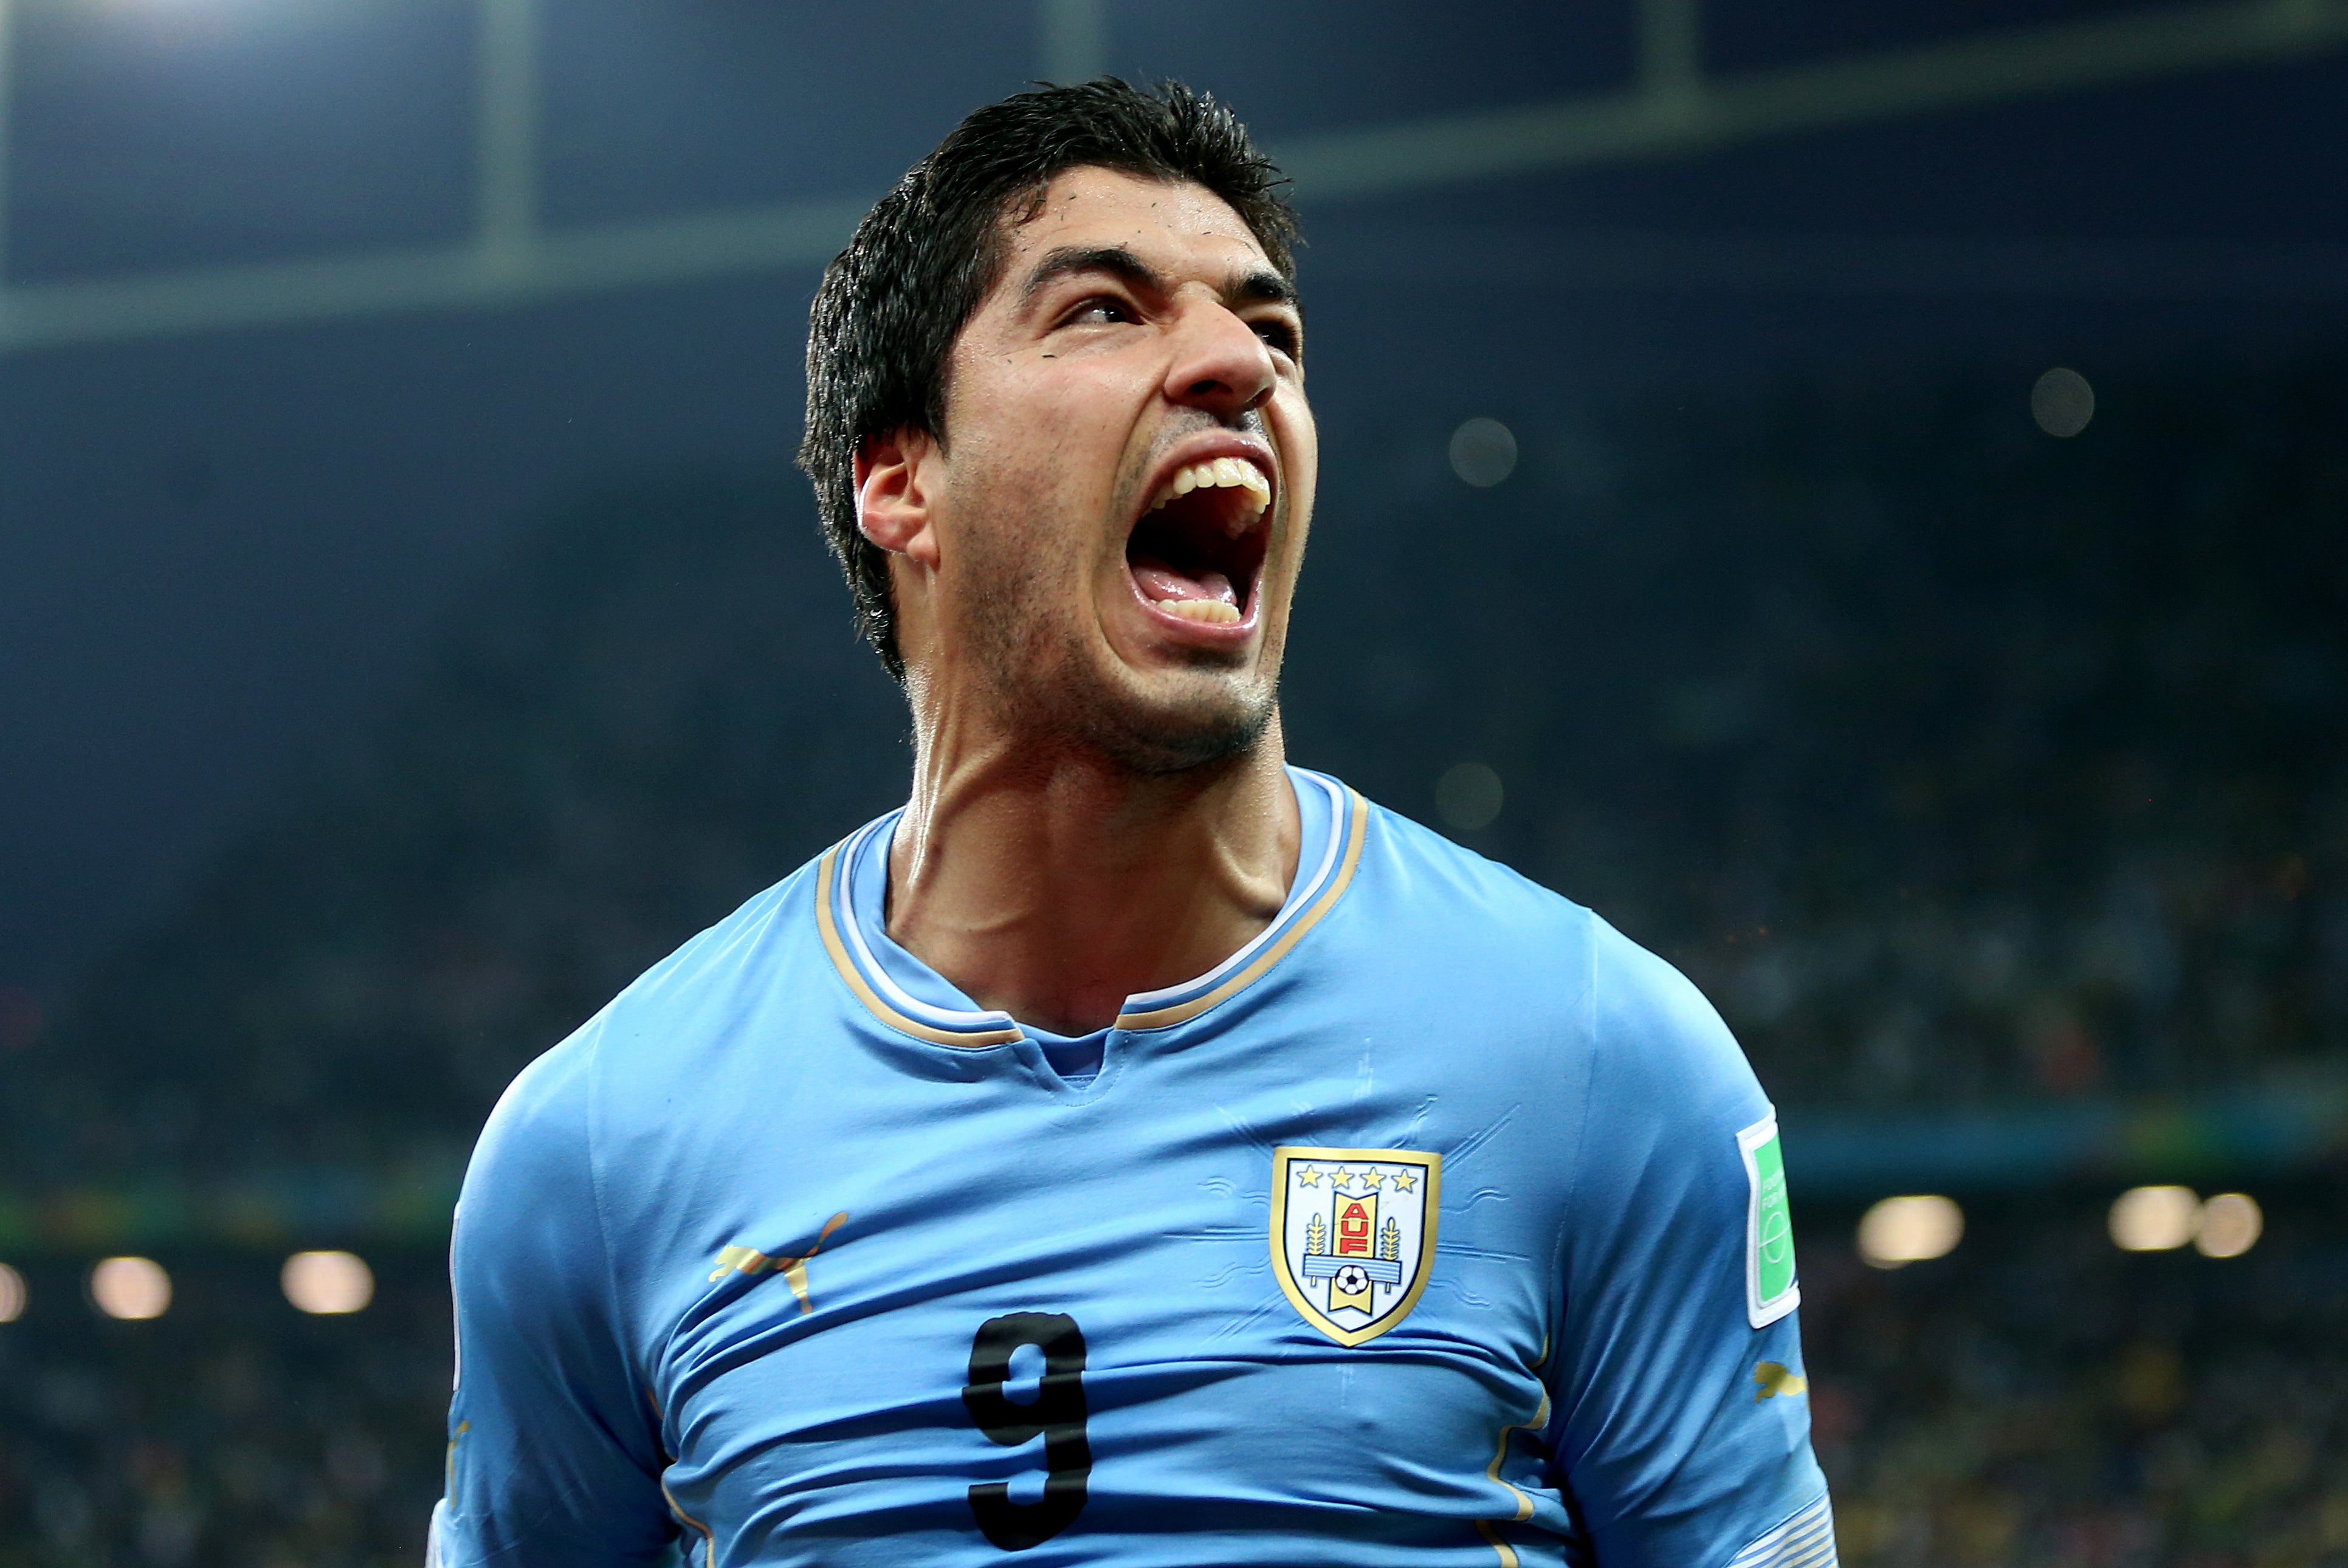 Luis Suarez transfer: Uruguay's all-time leading scorer returns to Nacional after 17 years | The Independent